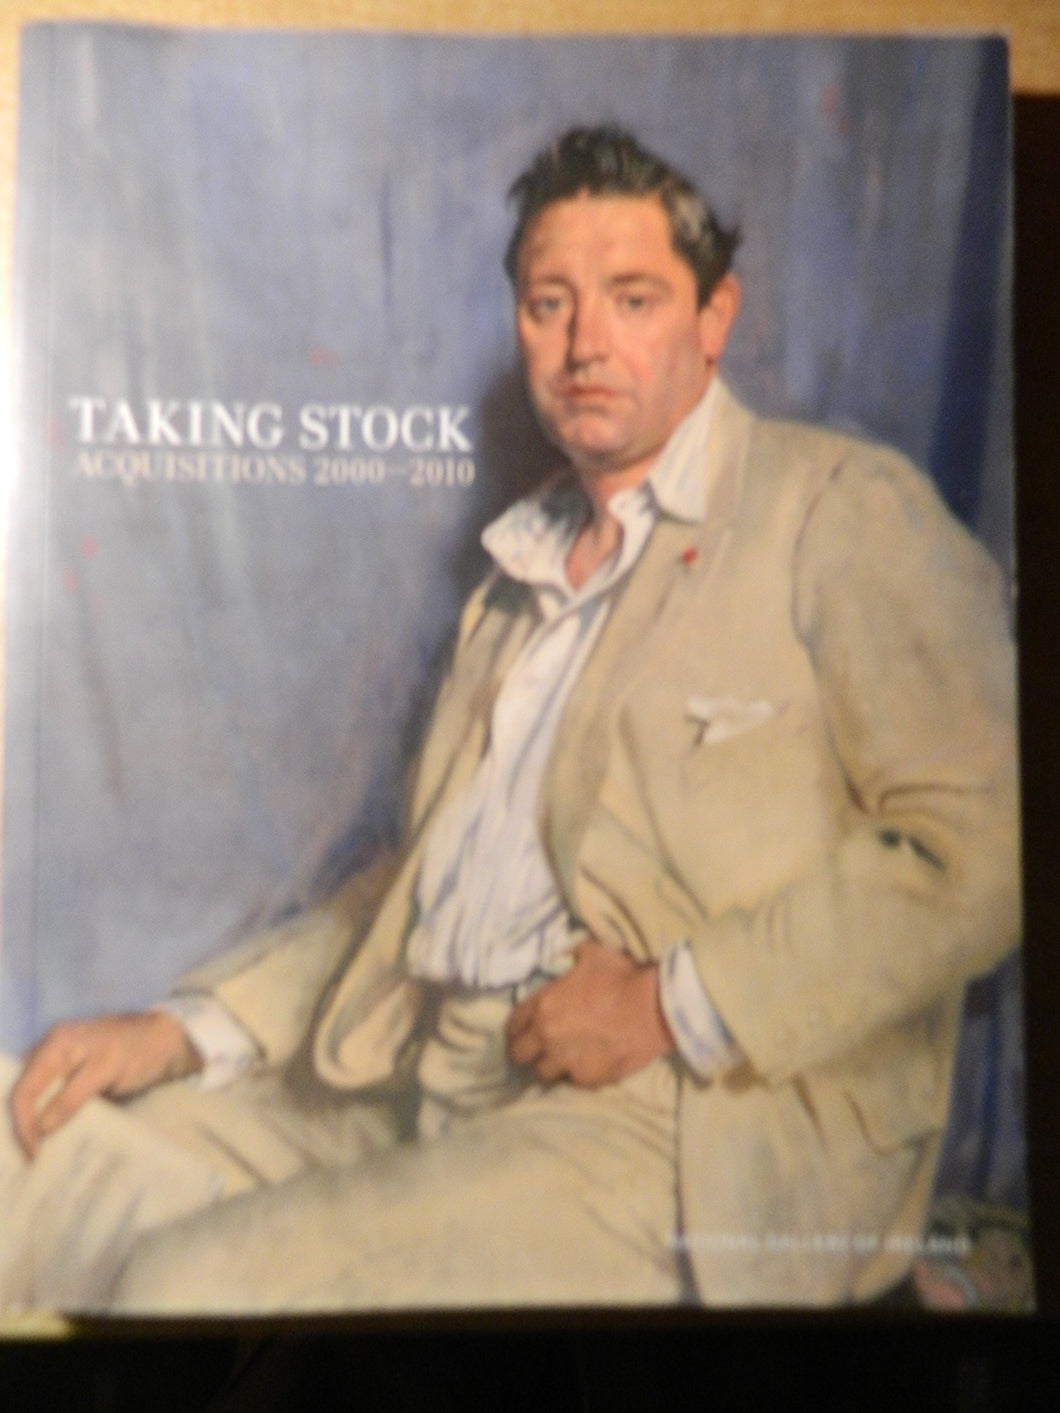 Taking Stock. Acquisitions 2000-2010. National Gallery of Ireland.